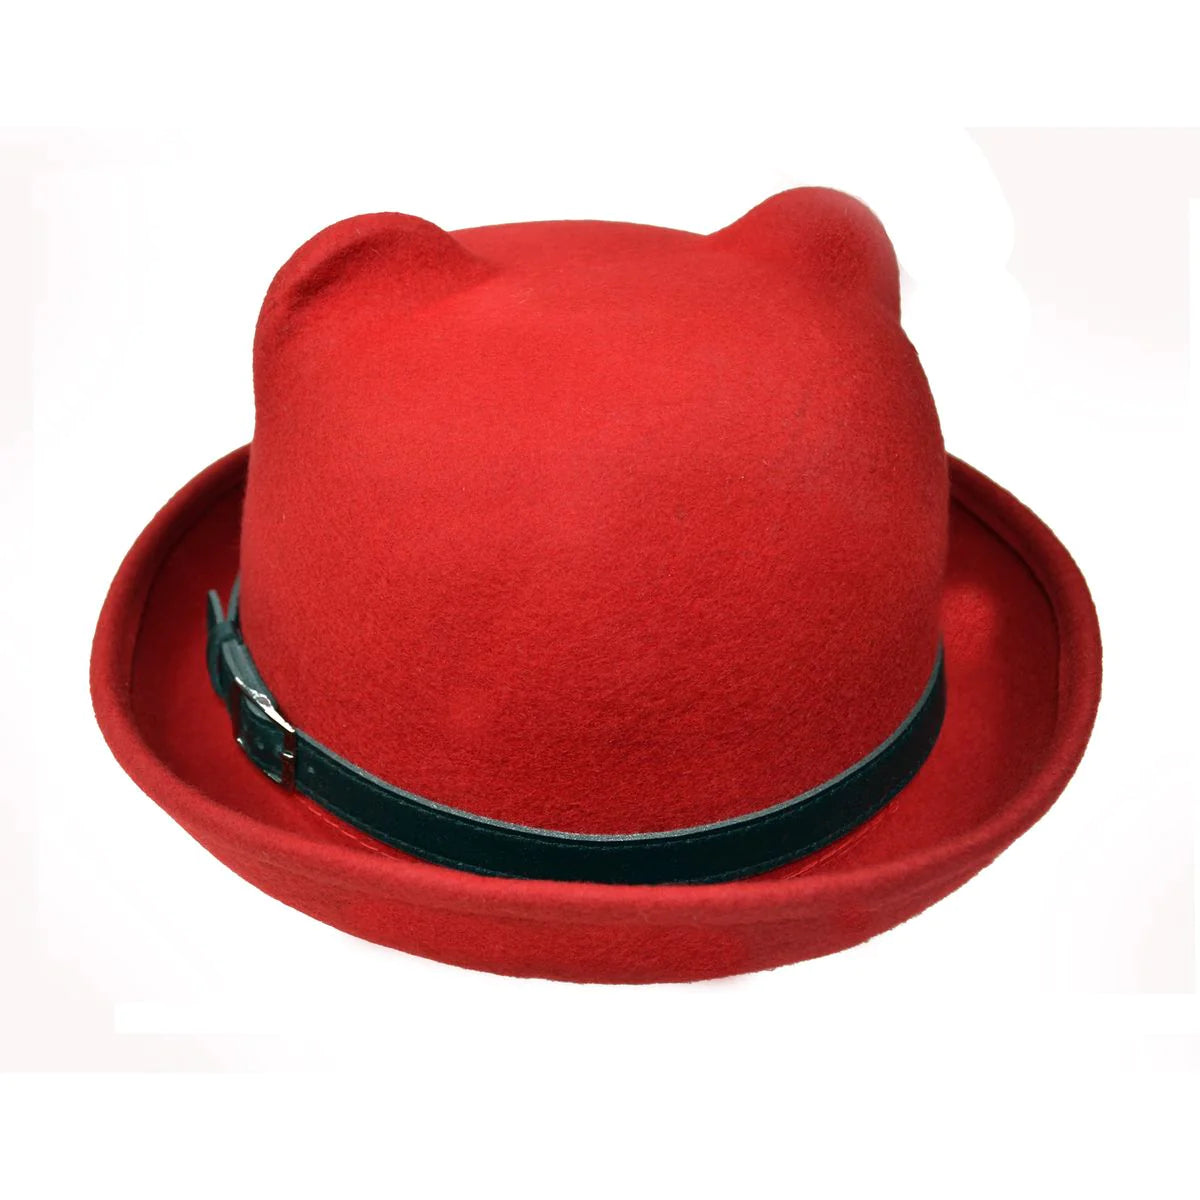 Kitty Bowler Hat Red